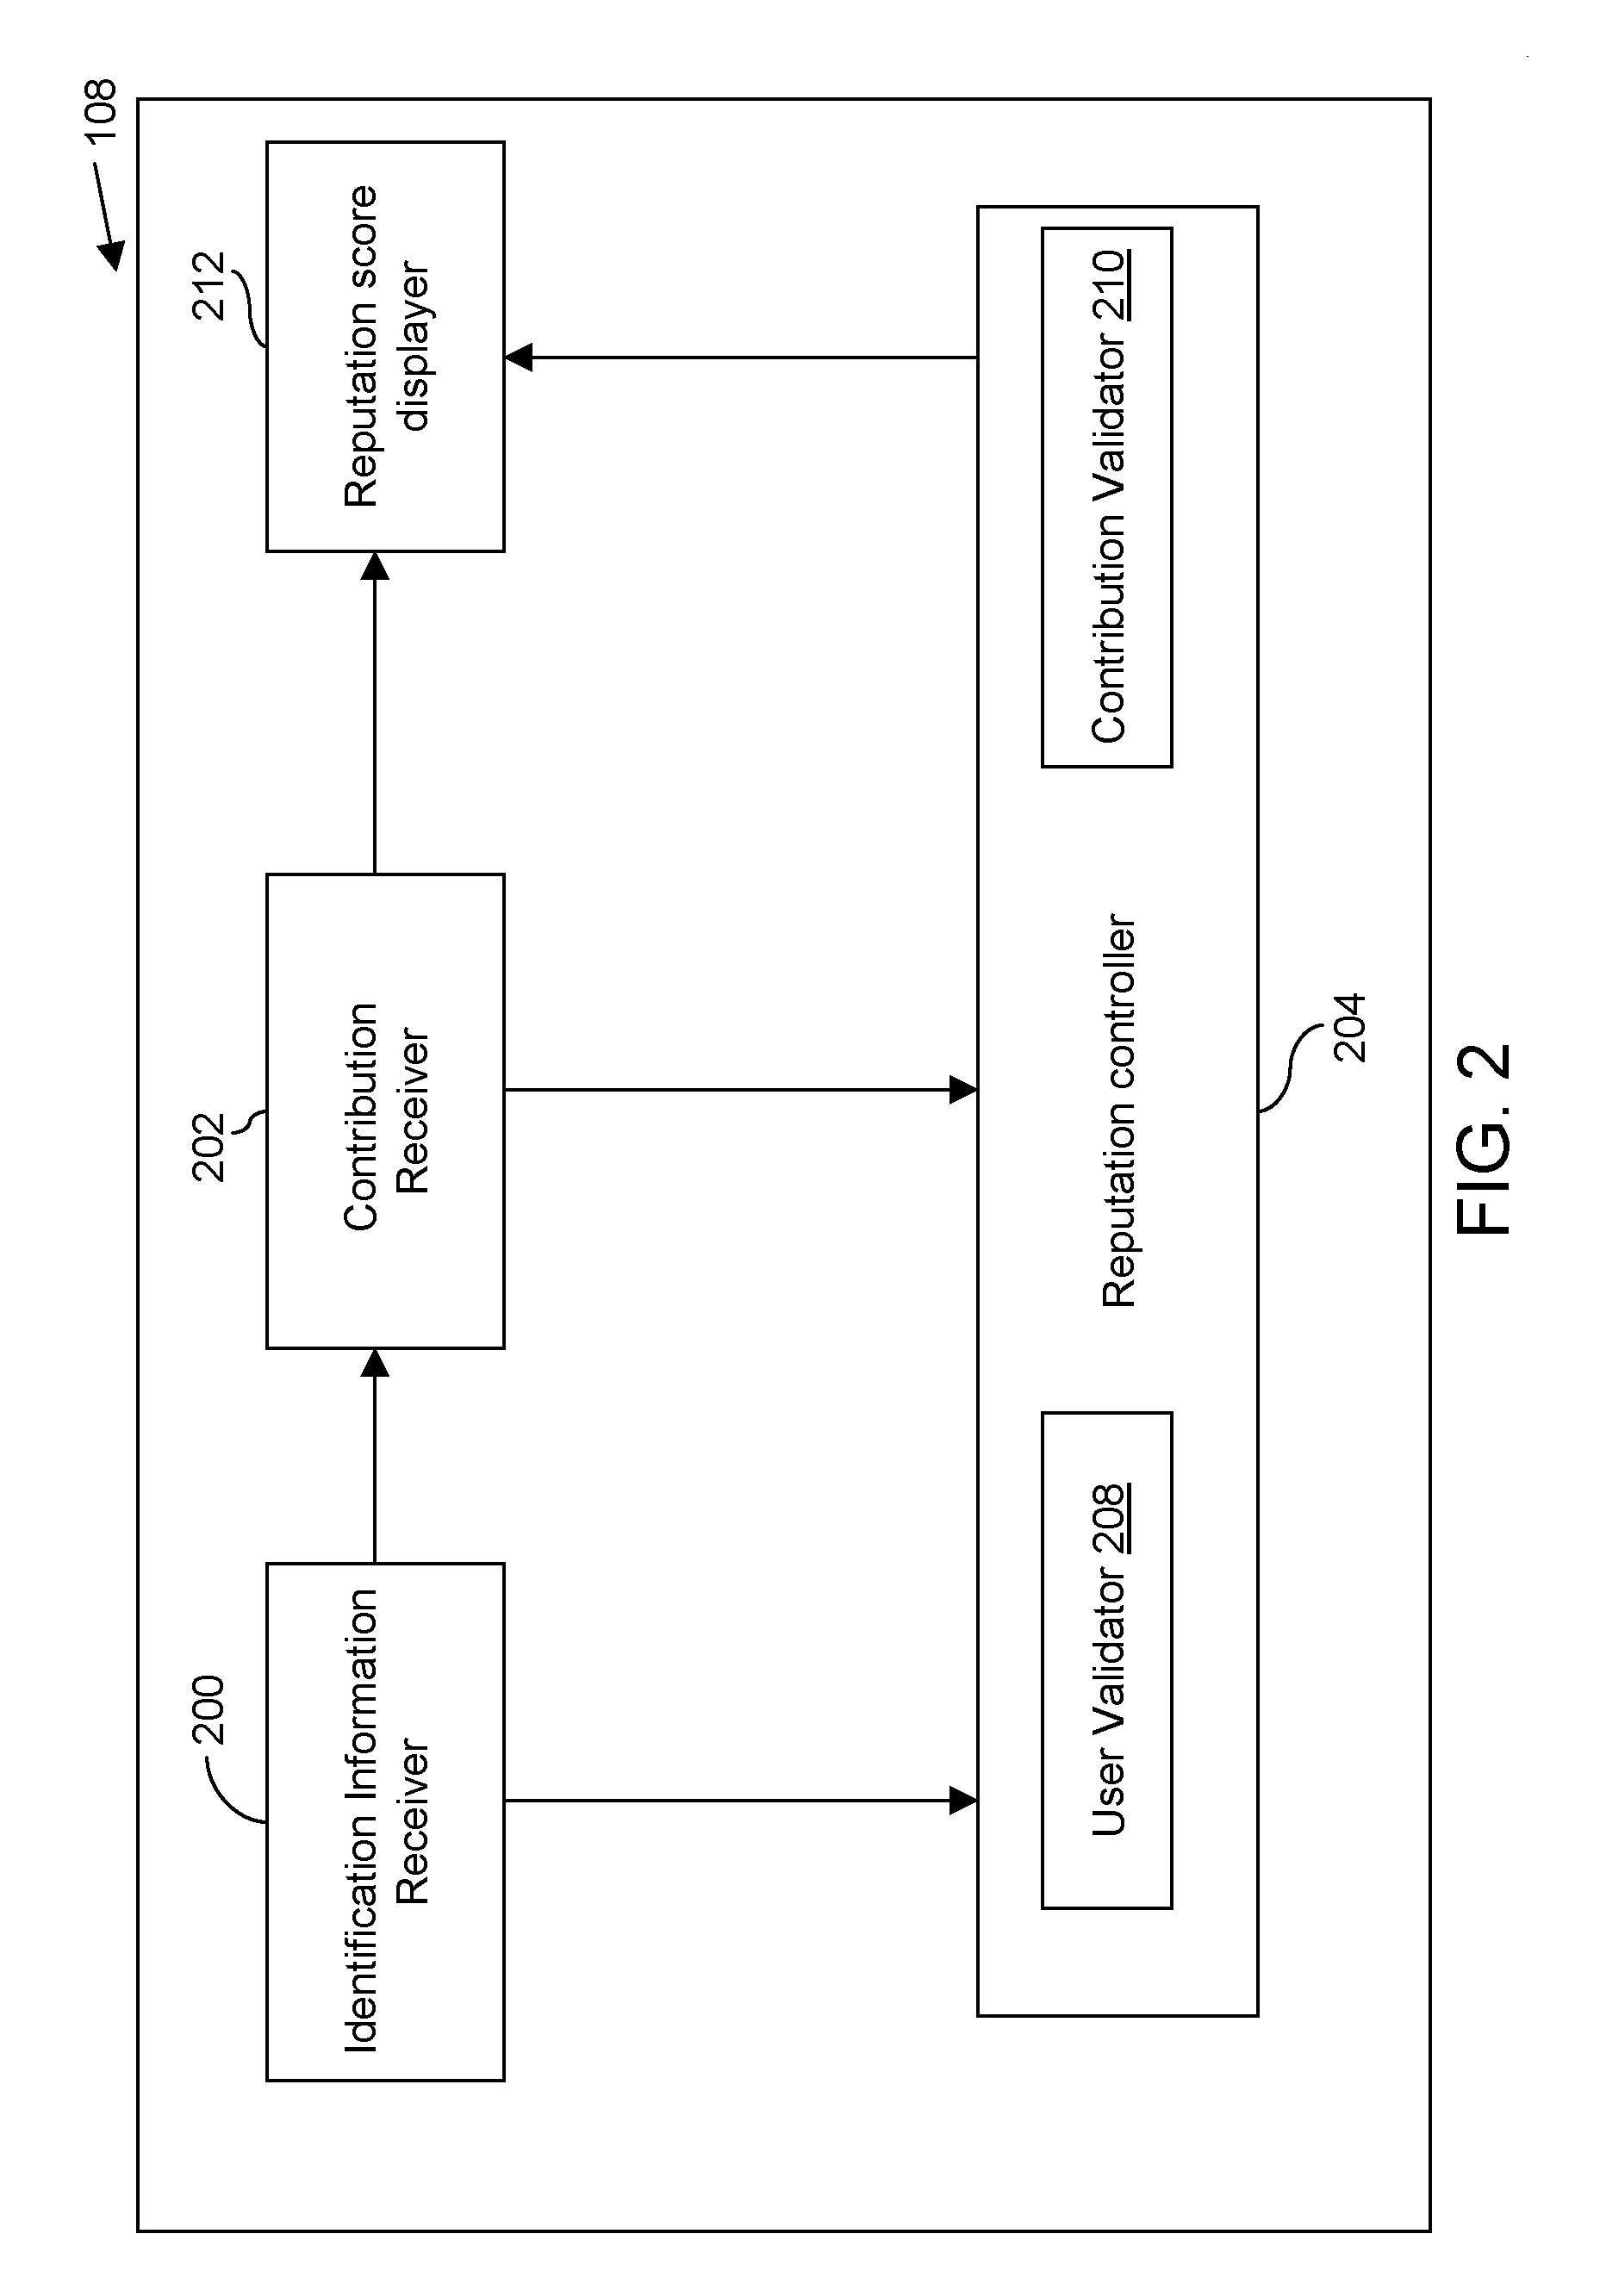 Method and system for managing domain specific and viewer specific reputation on online communities